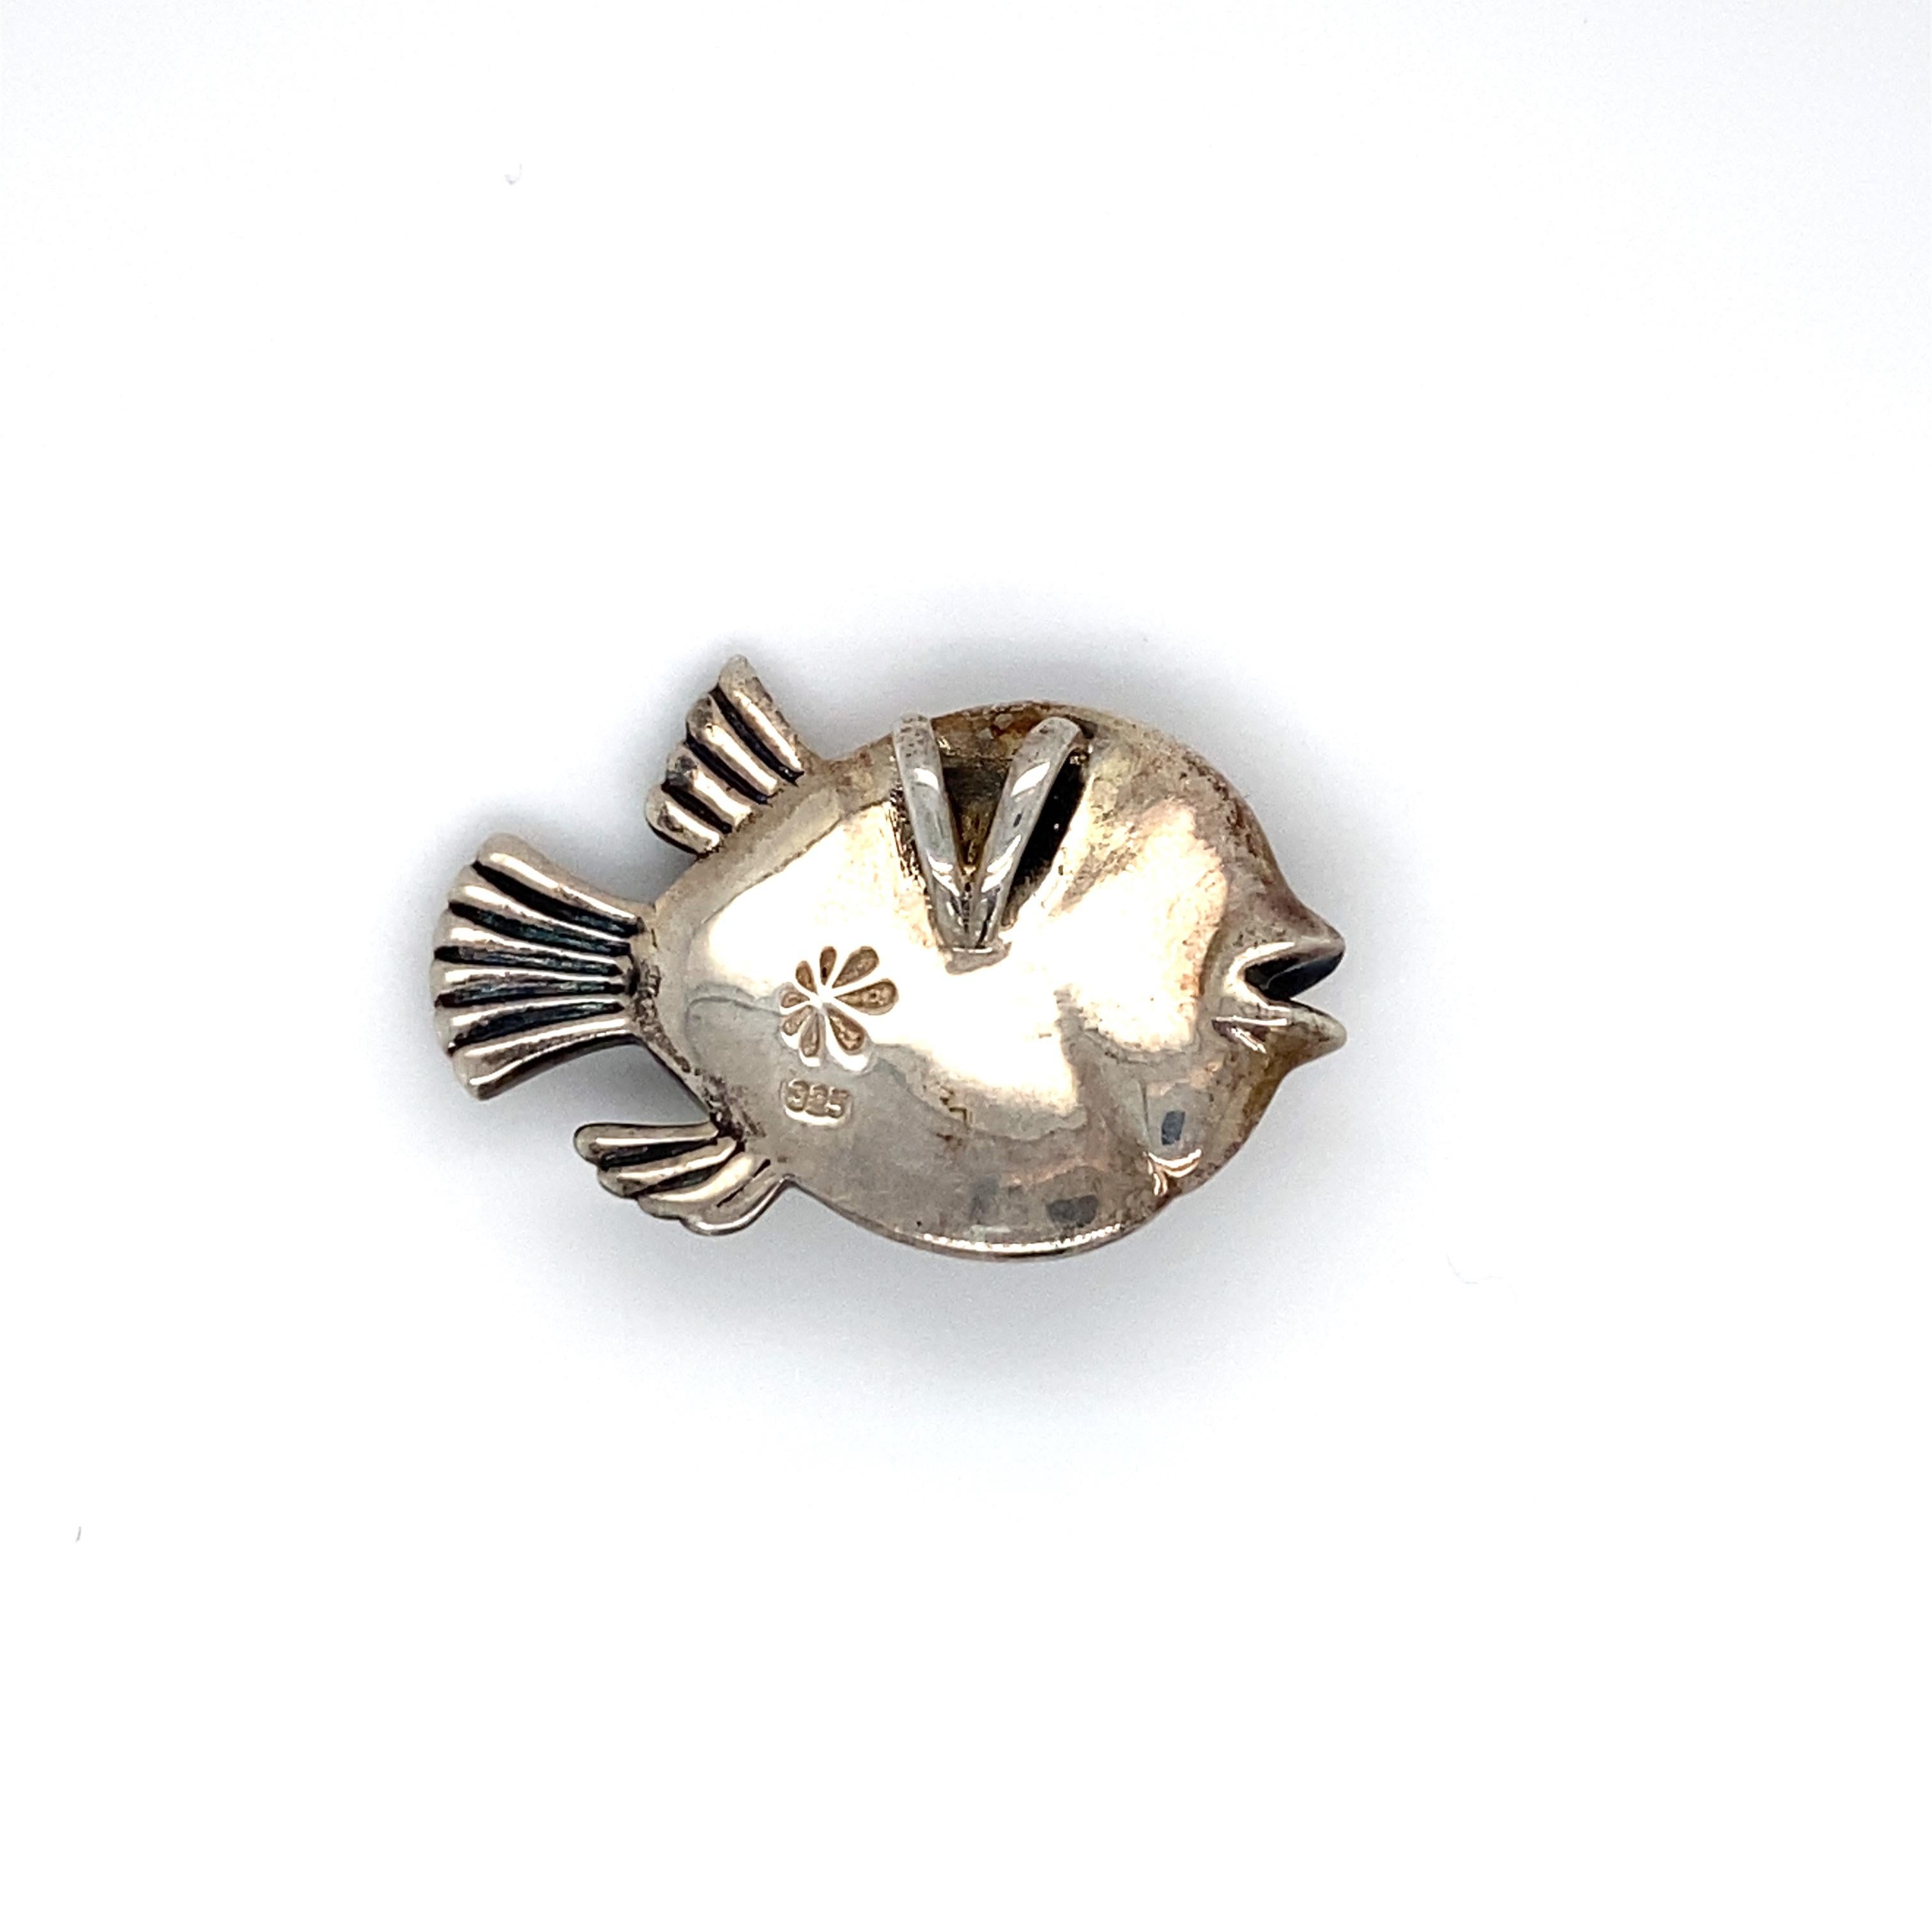 Circa: 1990s
Metal Type: Sterling silver
Weight: 11.4g
Dimensions: 1.25in W